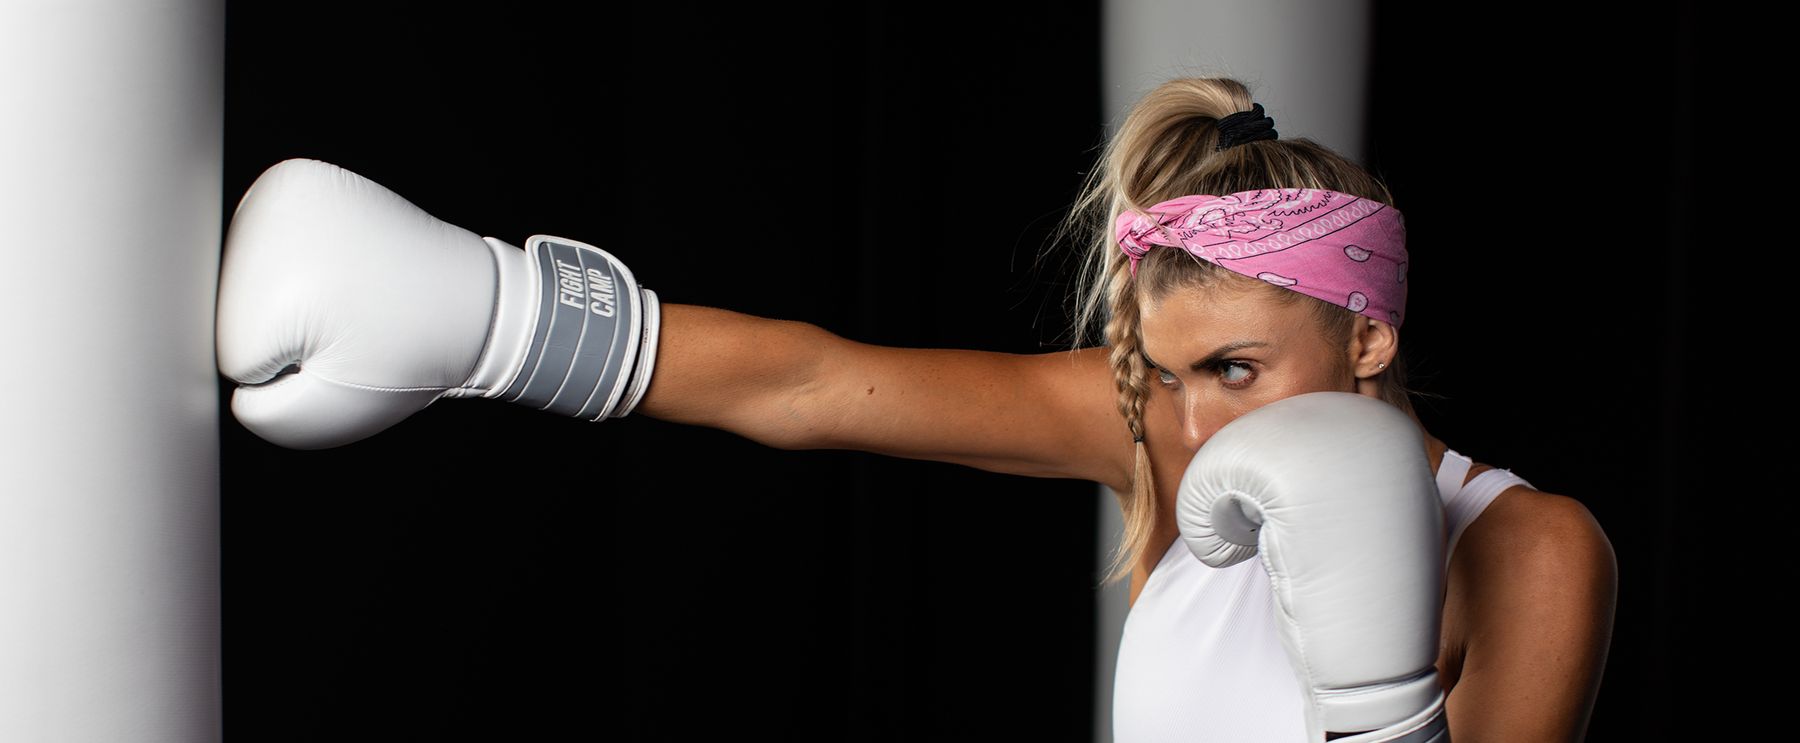 3 Tips To Start Boxing At Home and Track Your Progress